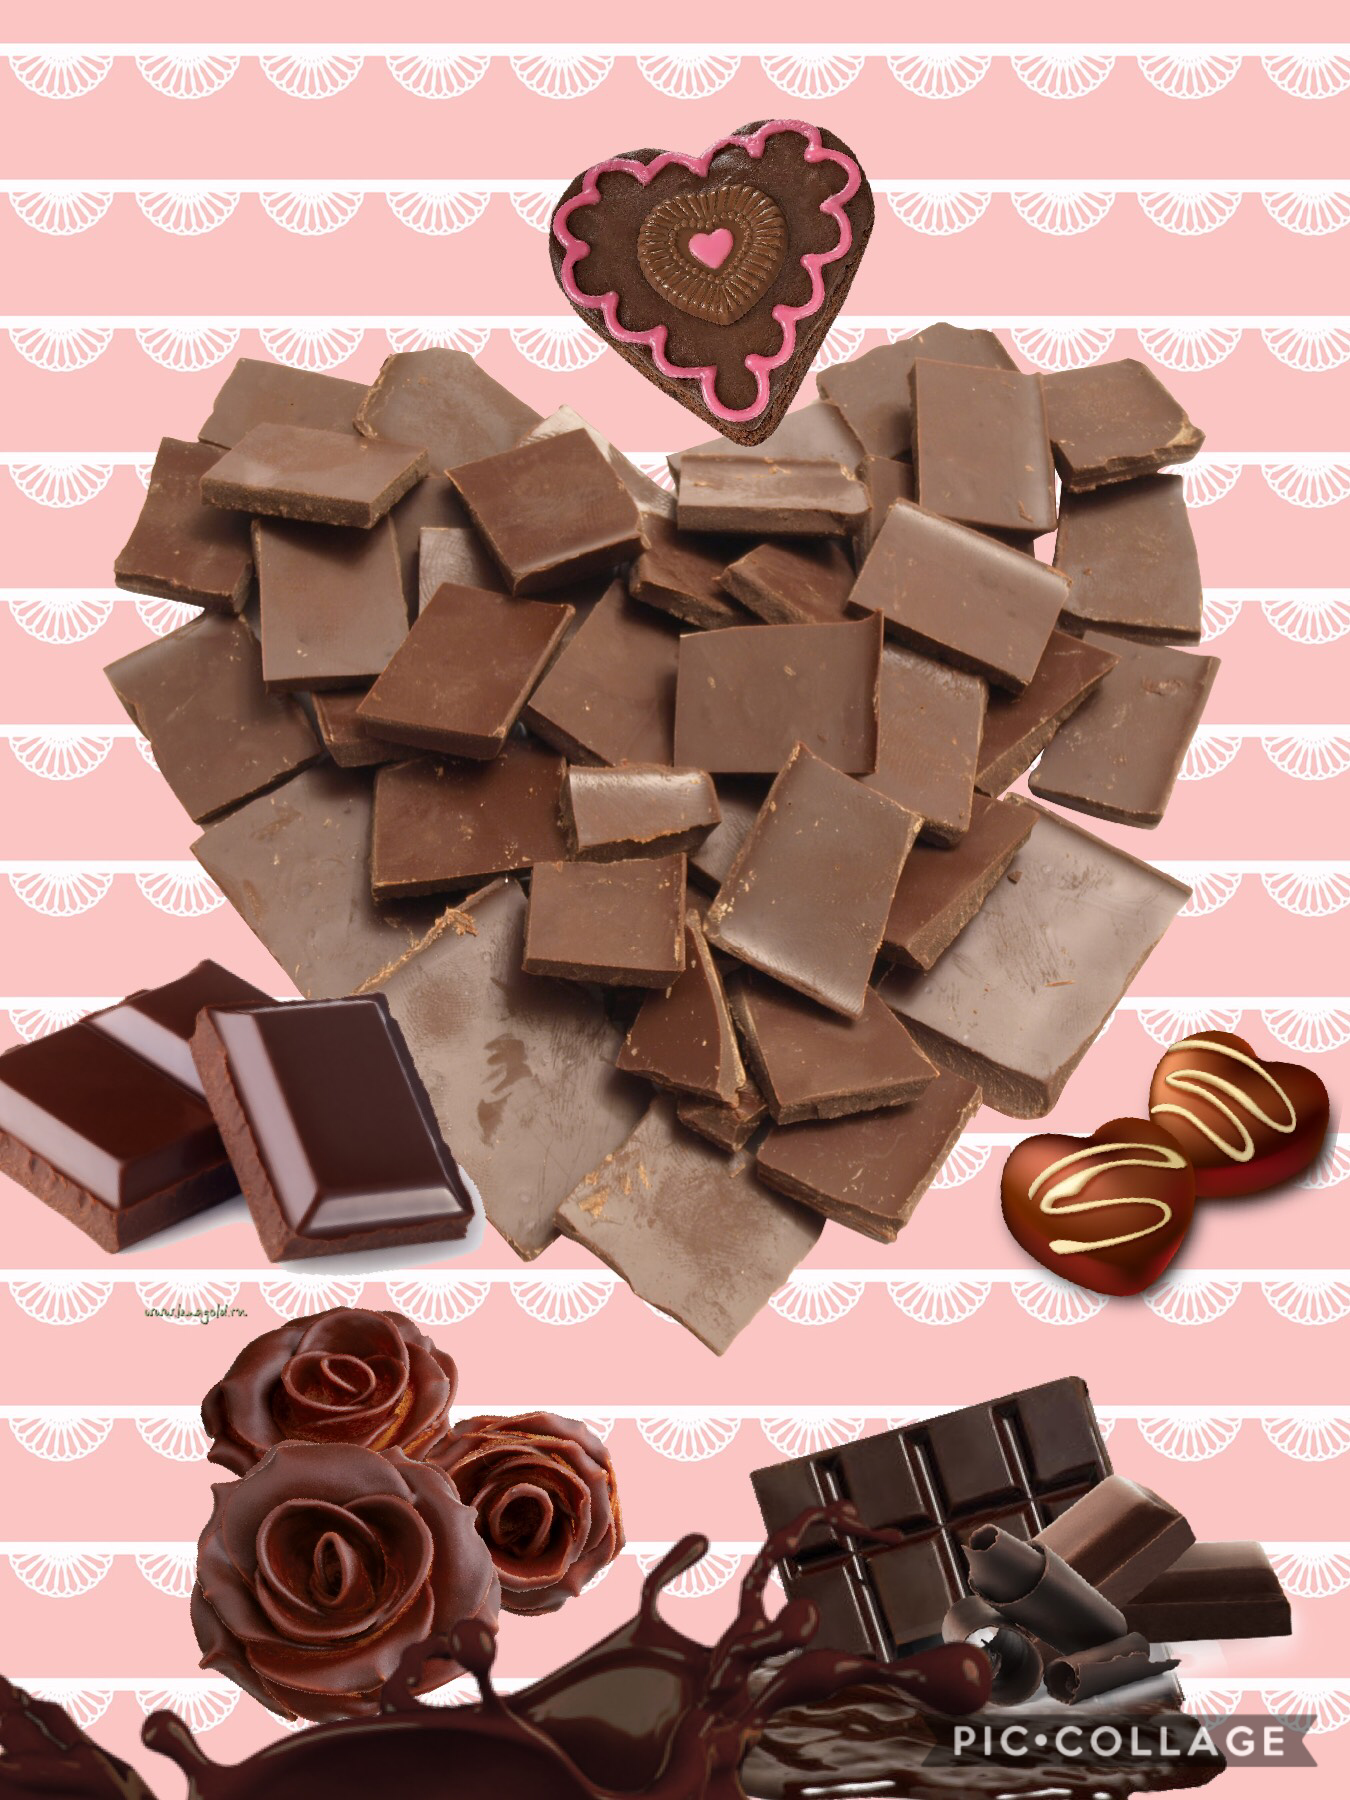 CHOCOLATE IS MA LIFE! COMMENT YOUR FAVORITE TYPE OF CHOCALATE!